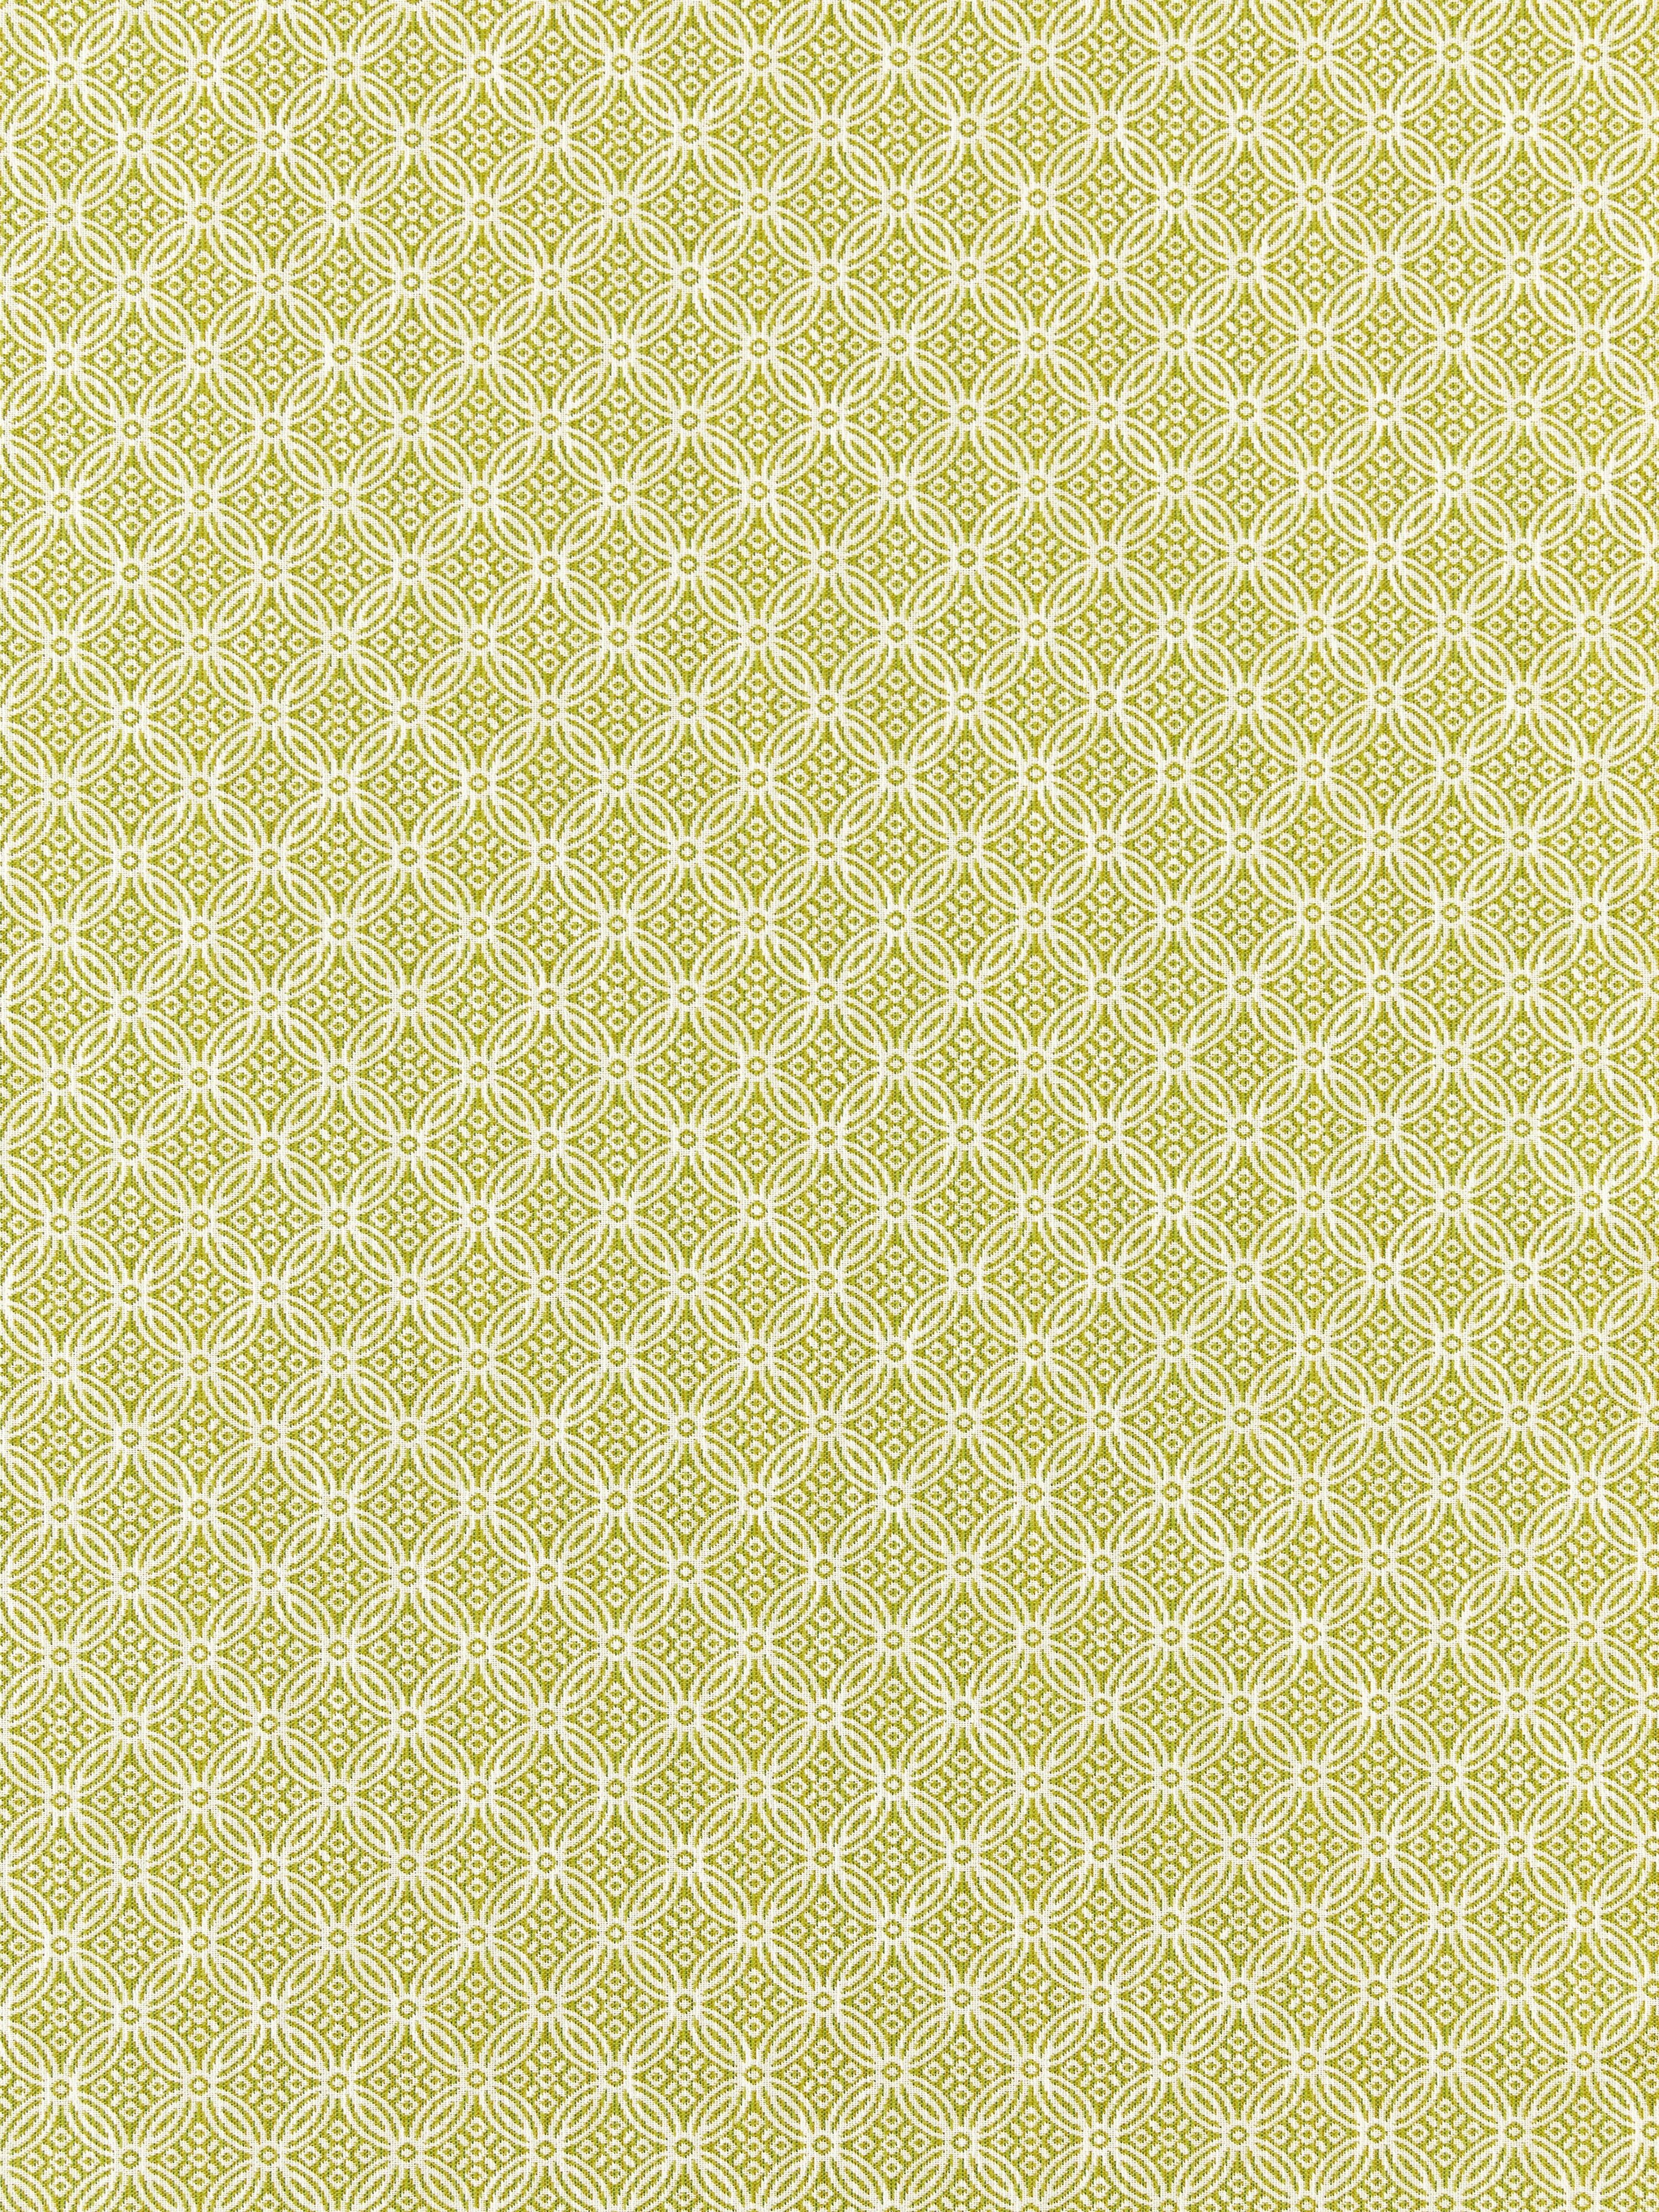 Cape May fabric in key lime color - pattern number SC 000227317 - by Scalamandre in the Scalamandre Fabrics Book 1 collection